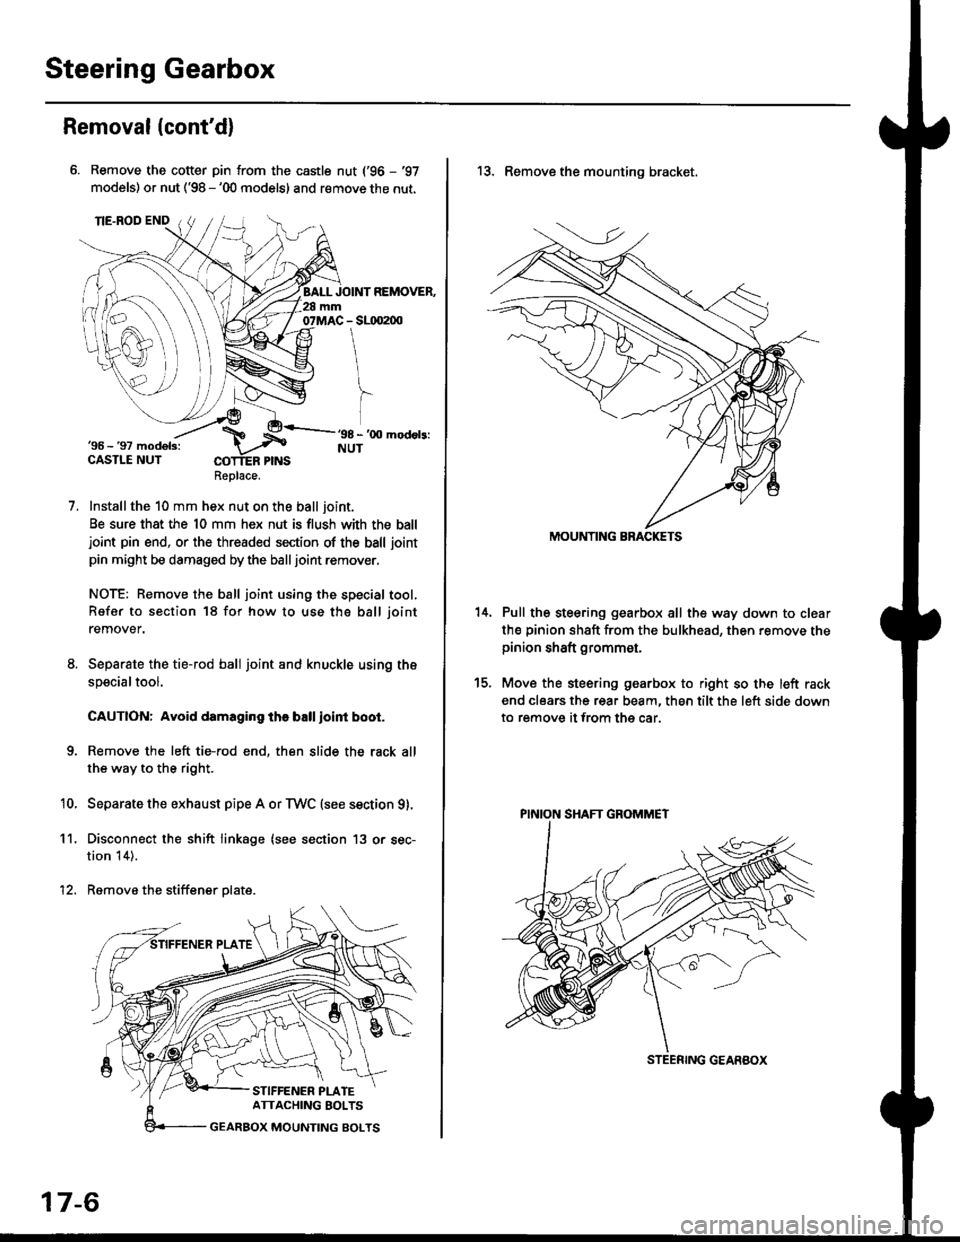 HONDA CIVIC 1998 6.G Workshop Manual Steering Gearbox
Removal(contd)
Remove the cotter pin from the castle nut (96 - 97
models) or nut (98 - 00 models) and remove the nut.
Installthe 10 mm hex nut on the ball joint.
Be sure that the